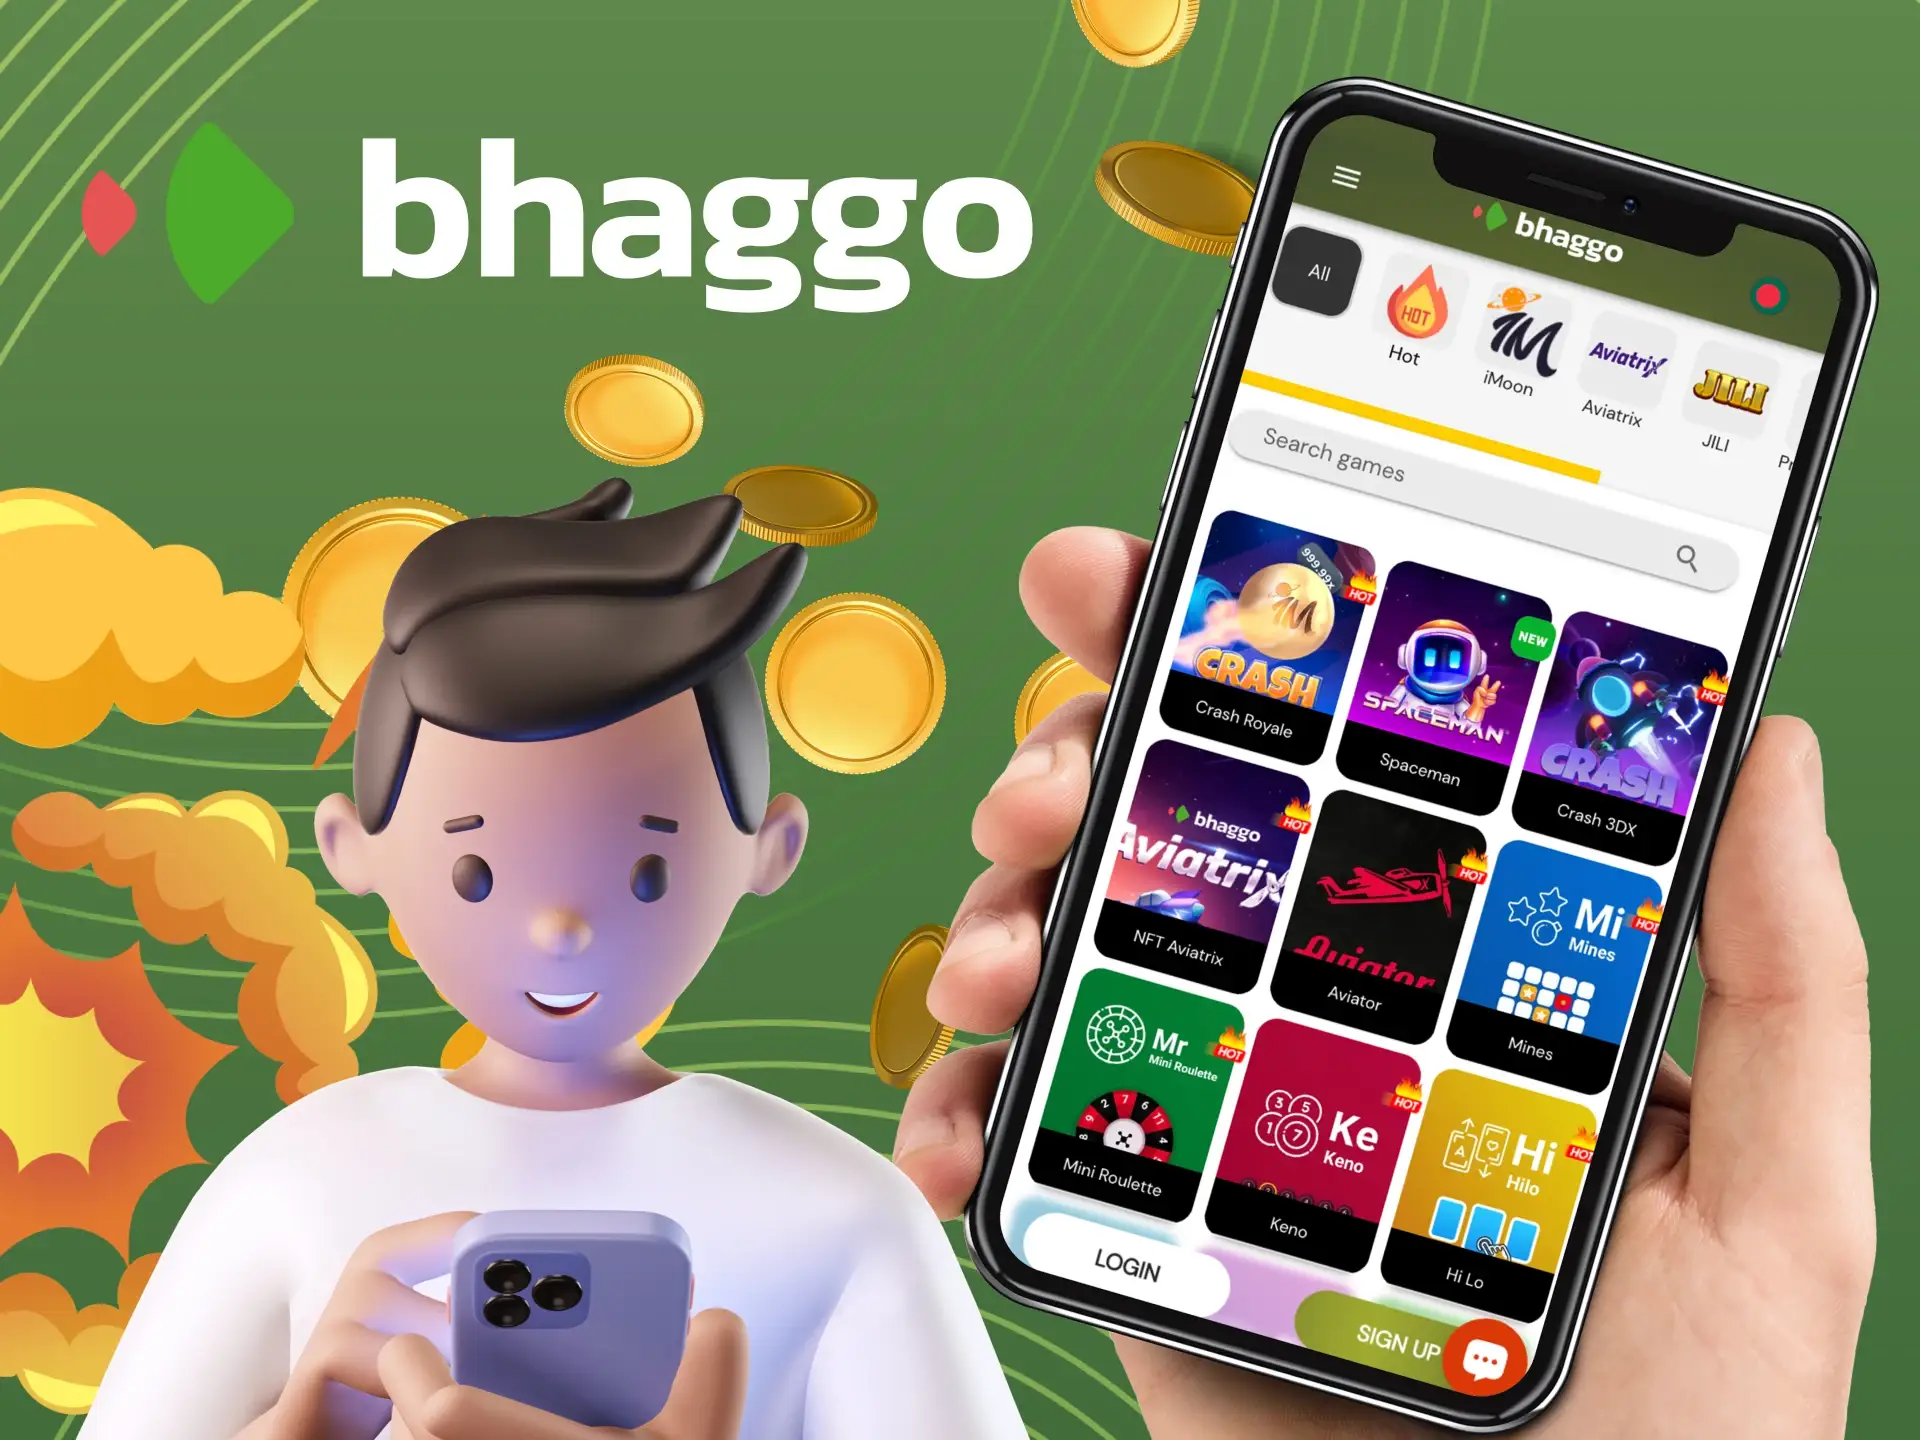 Bhaggo crush games on your mobile device.